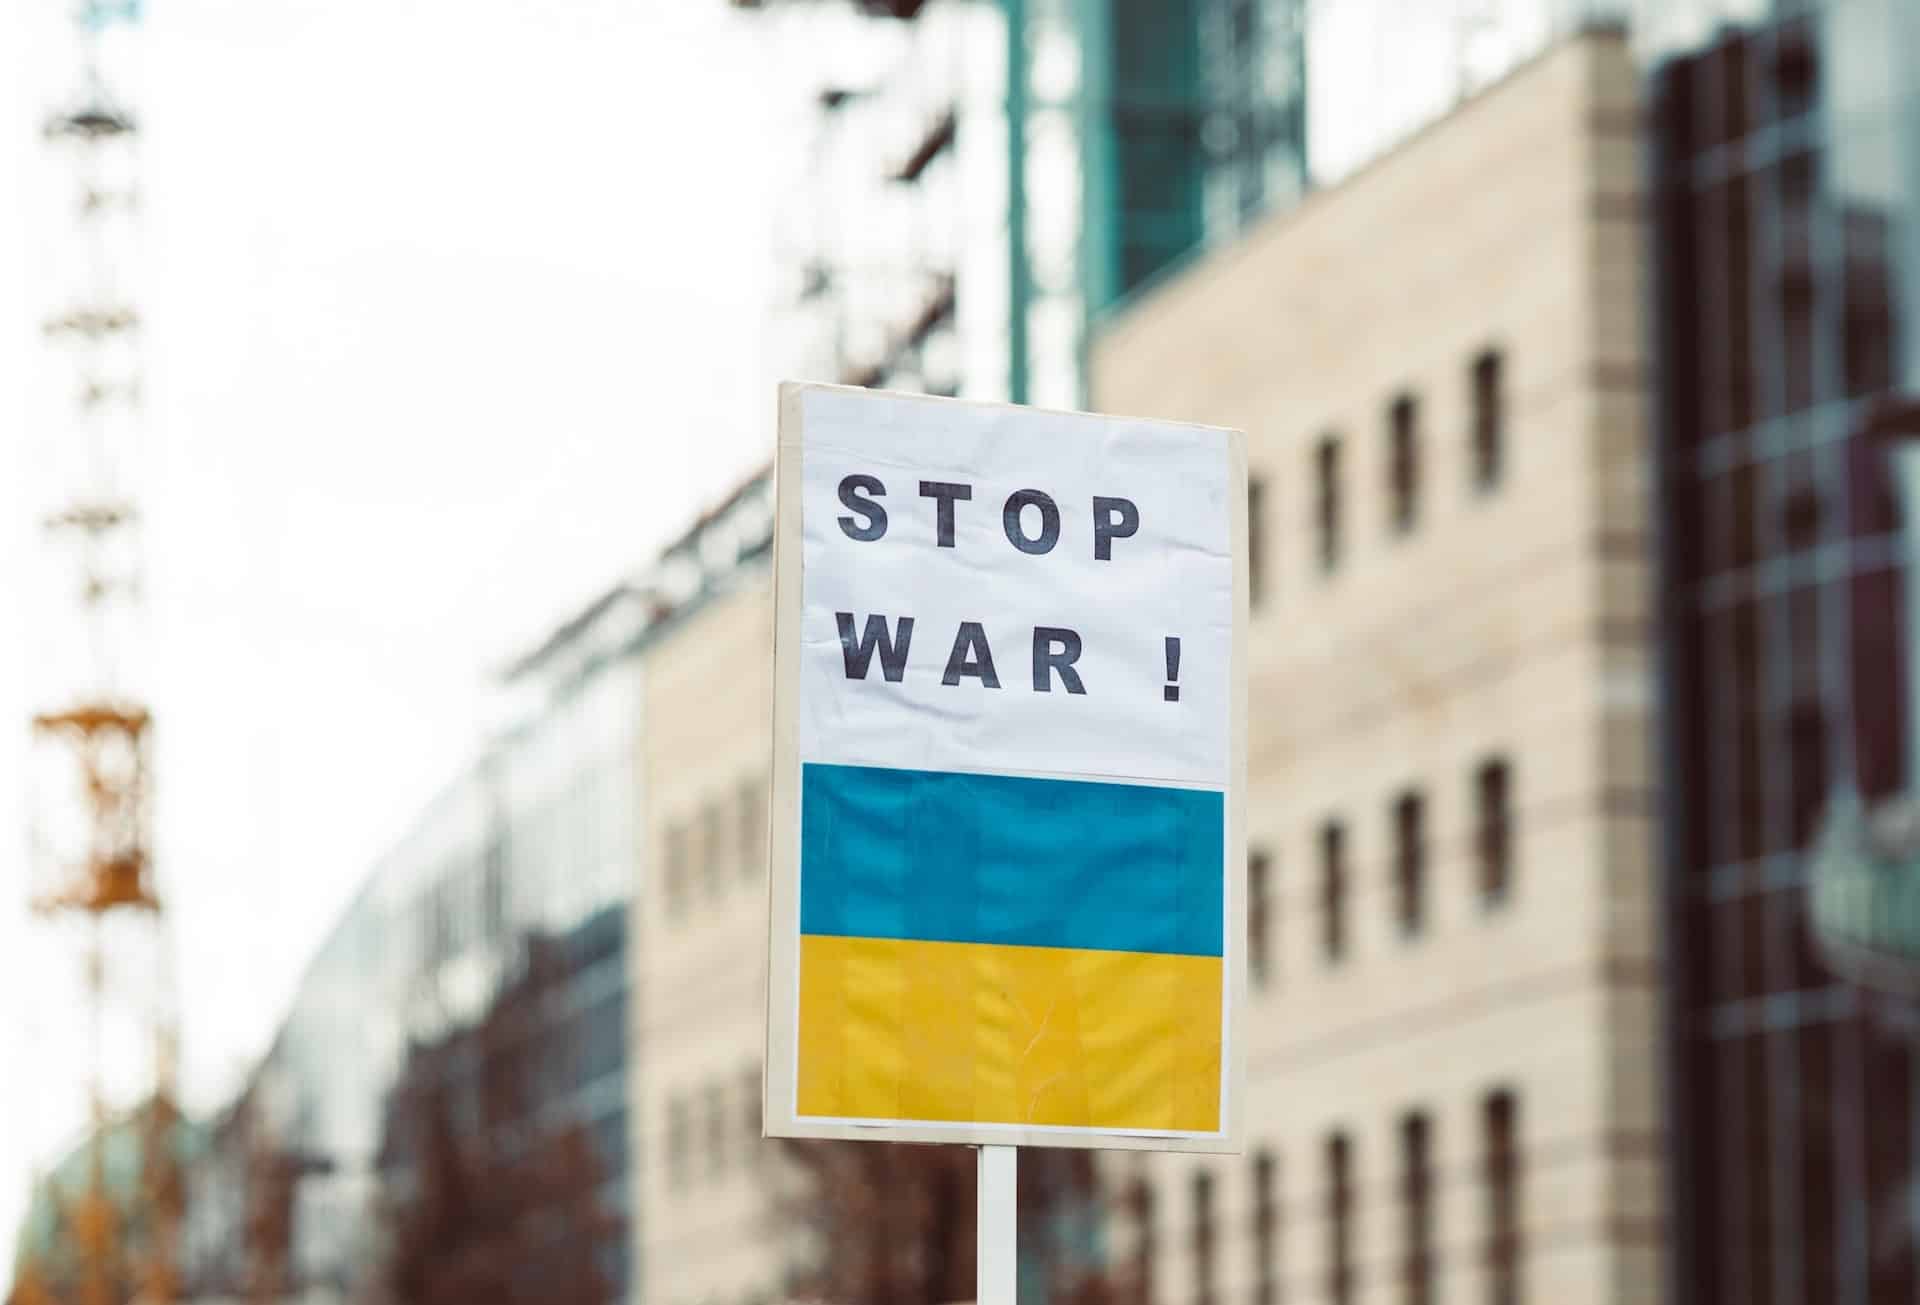 Image of a banner with a "Stop War" caption and the Ukrainian flag below. File photo.